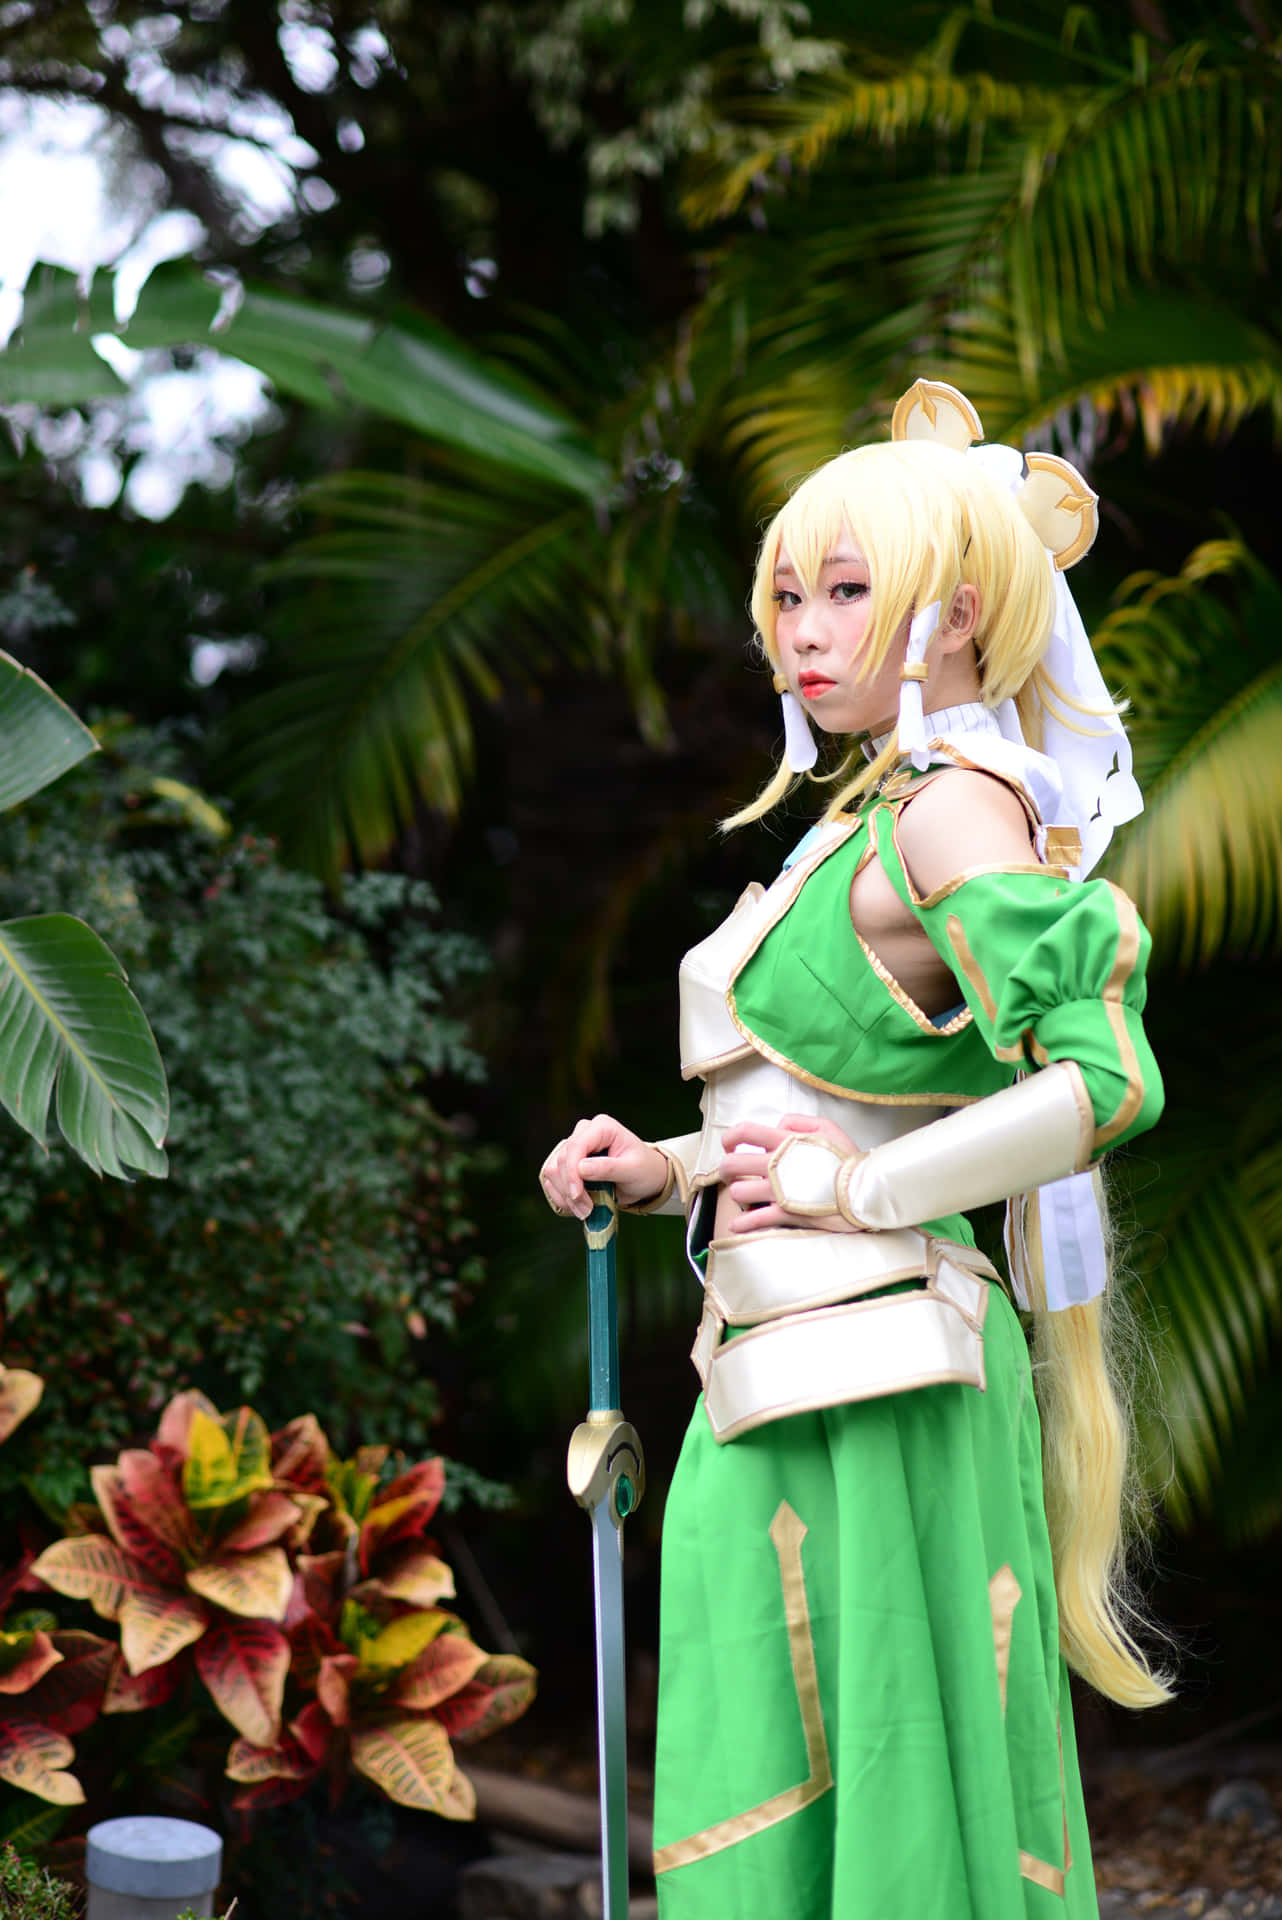 Gorgeous Sword Art Online Cosplay Brings Asuna To Life